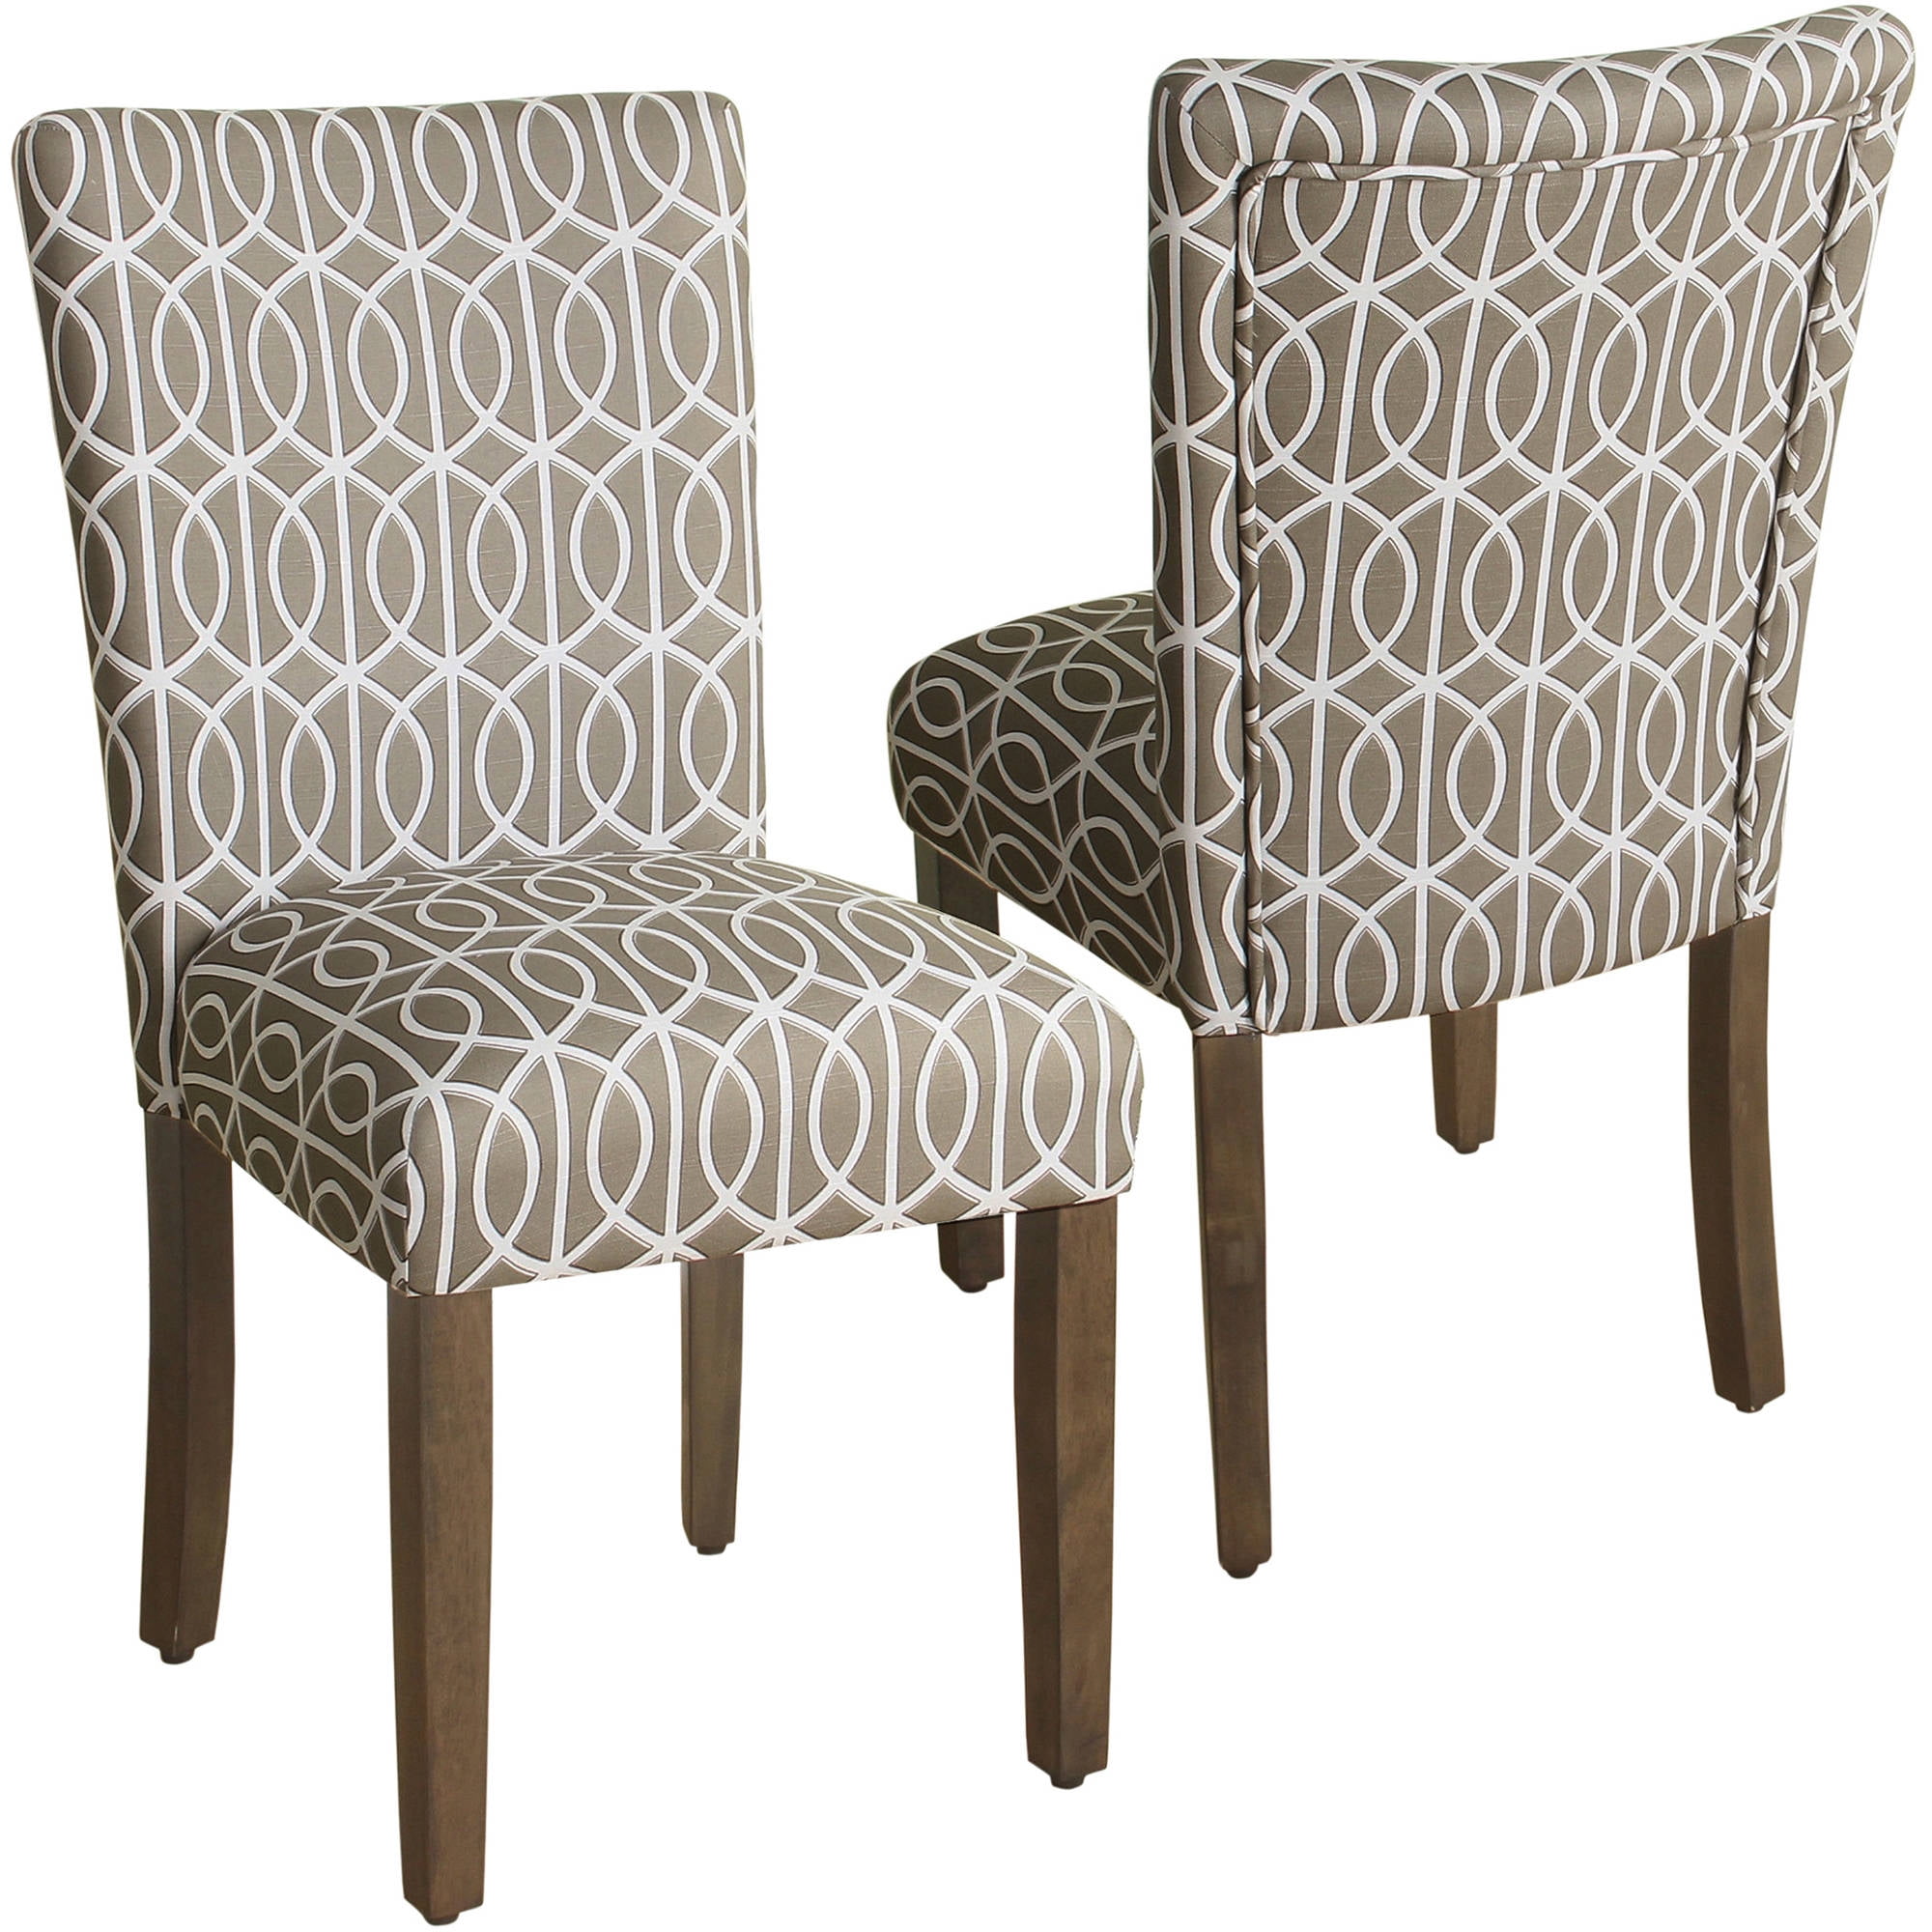 HomePop Parsons Dining Chairs (set of 2), Multiple Colors - Walmart.com